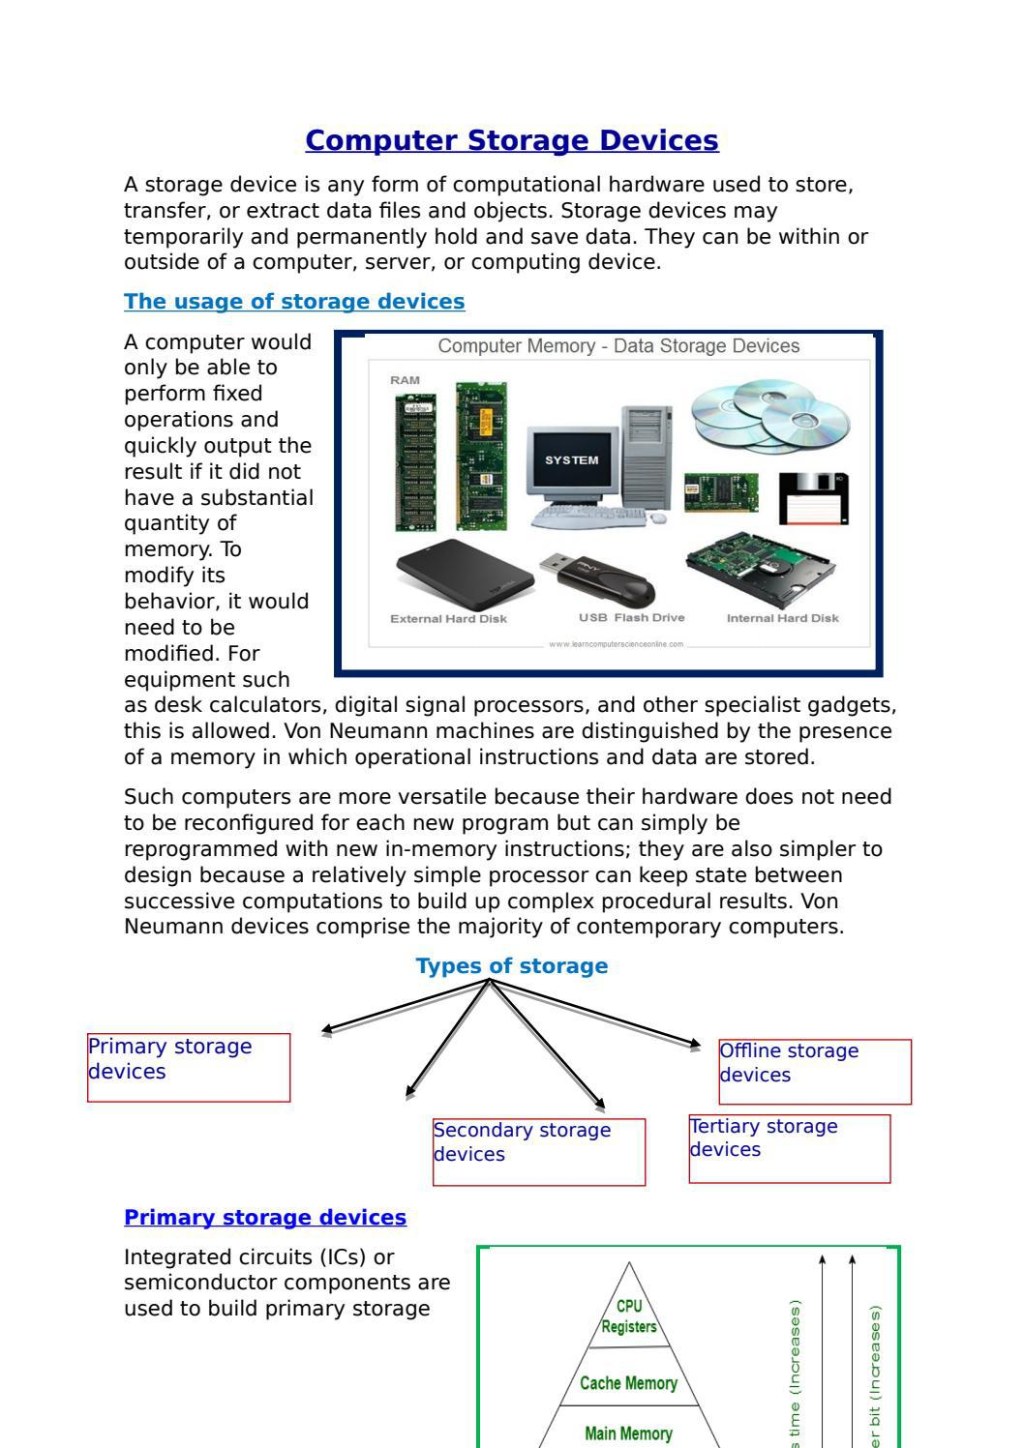 Picture of: Computer Storage Devices by manavee – Issuu